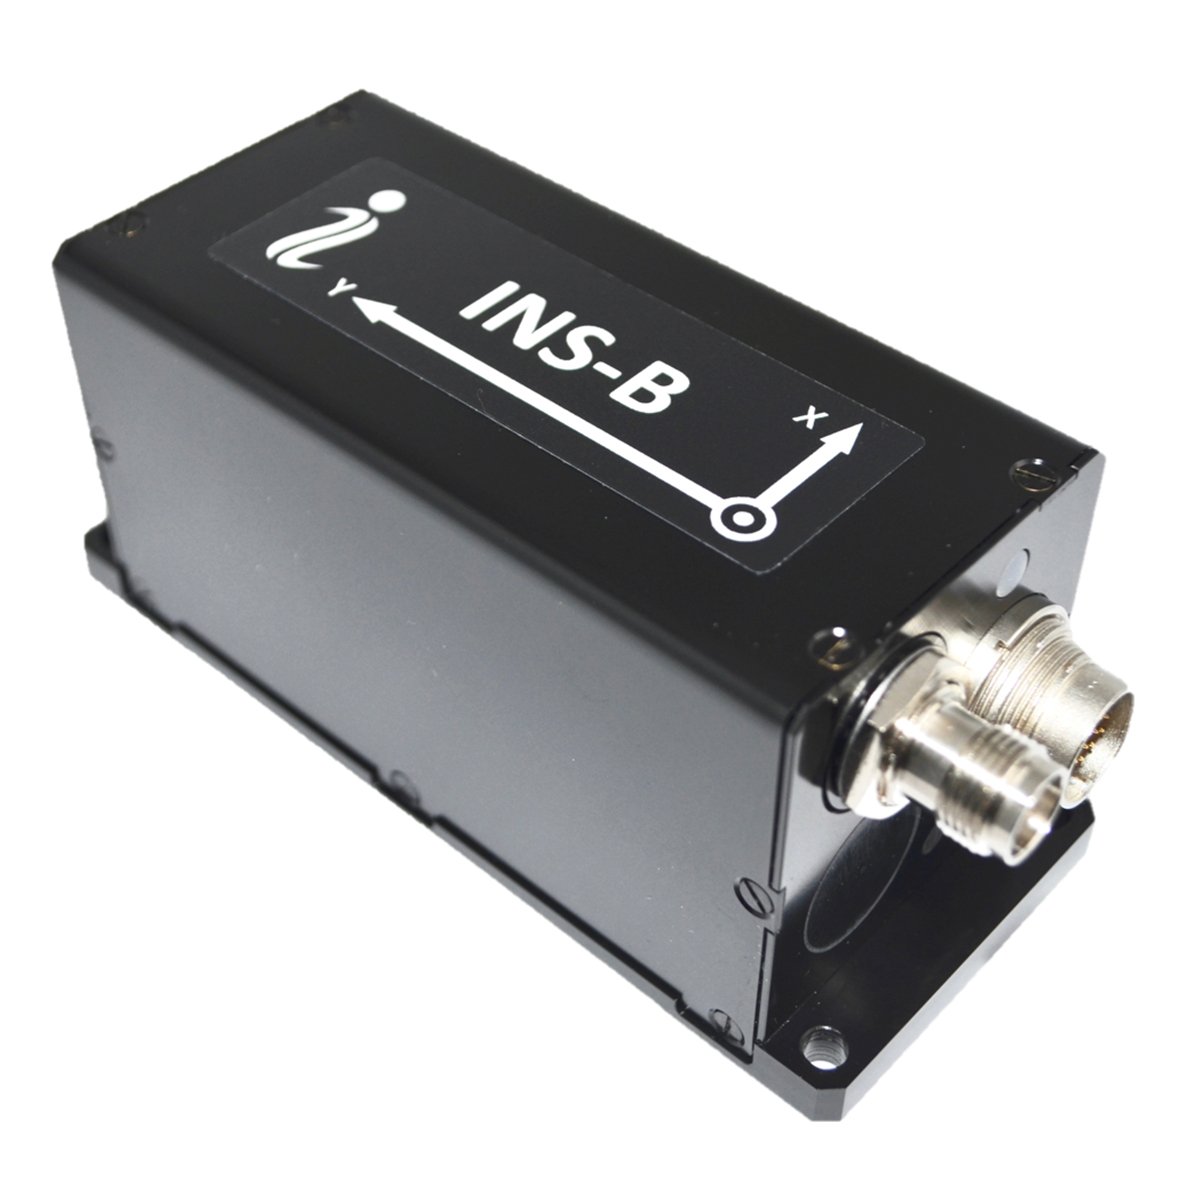 INS-B - Basic Version of Single Antenna GPS-Aided Inertial Navigation System